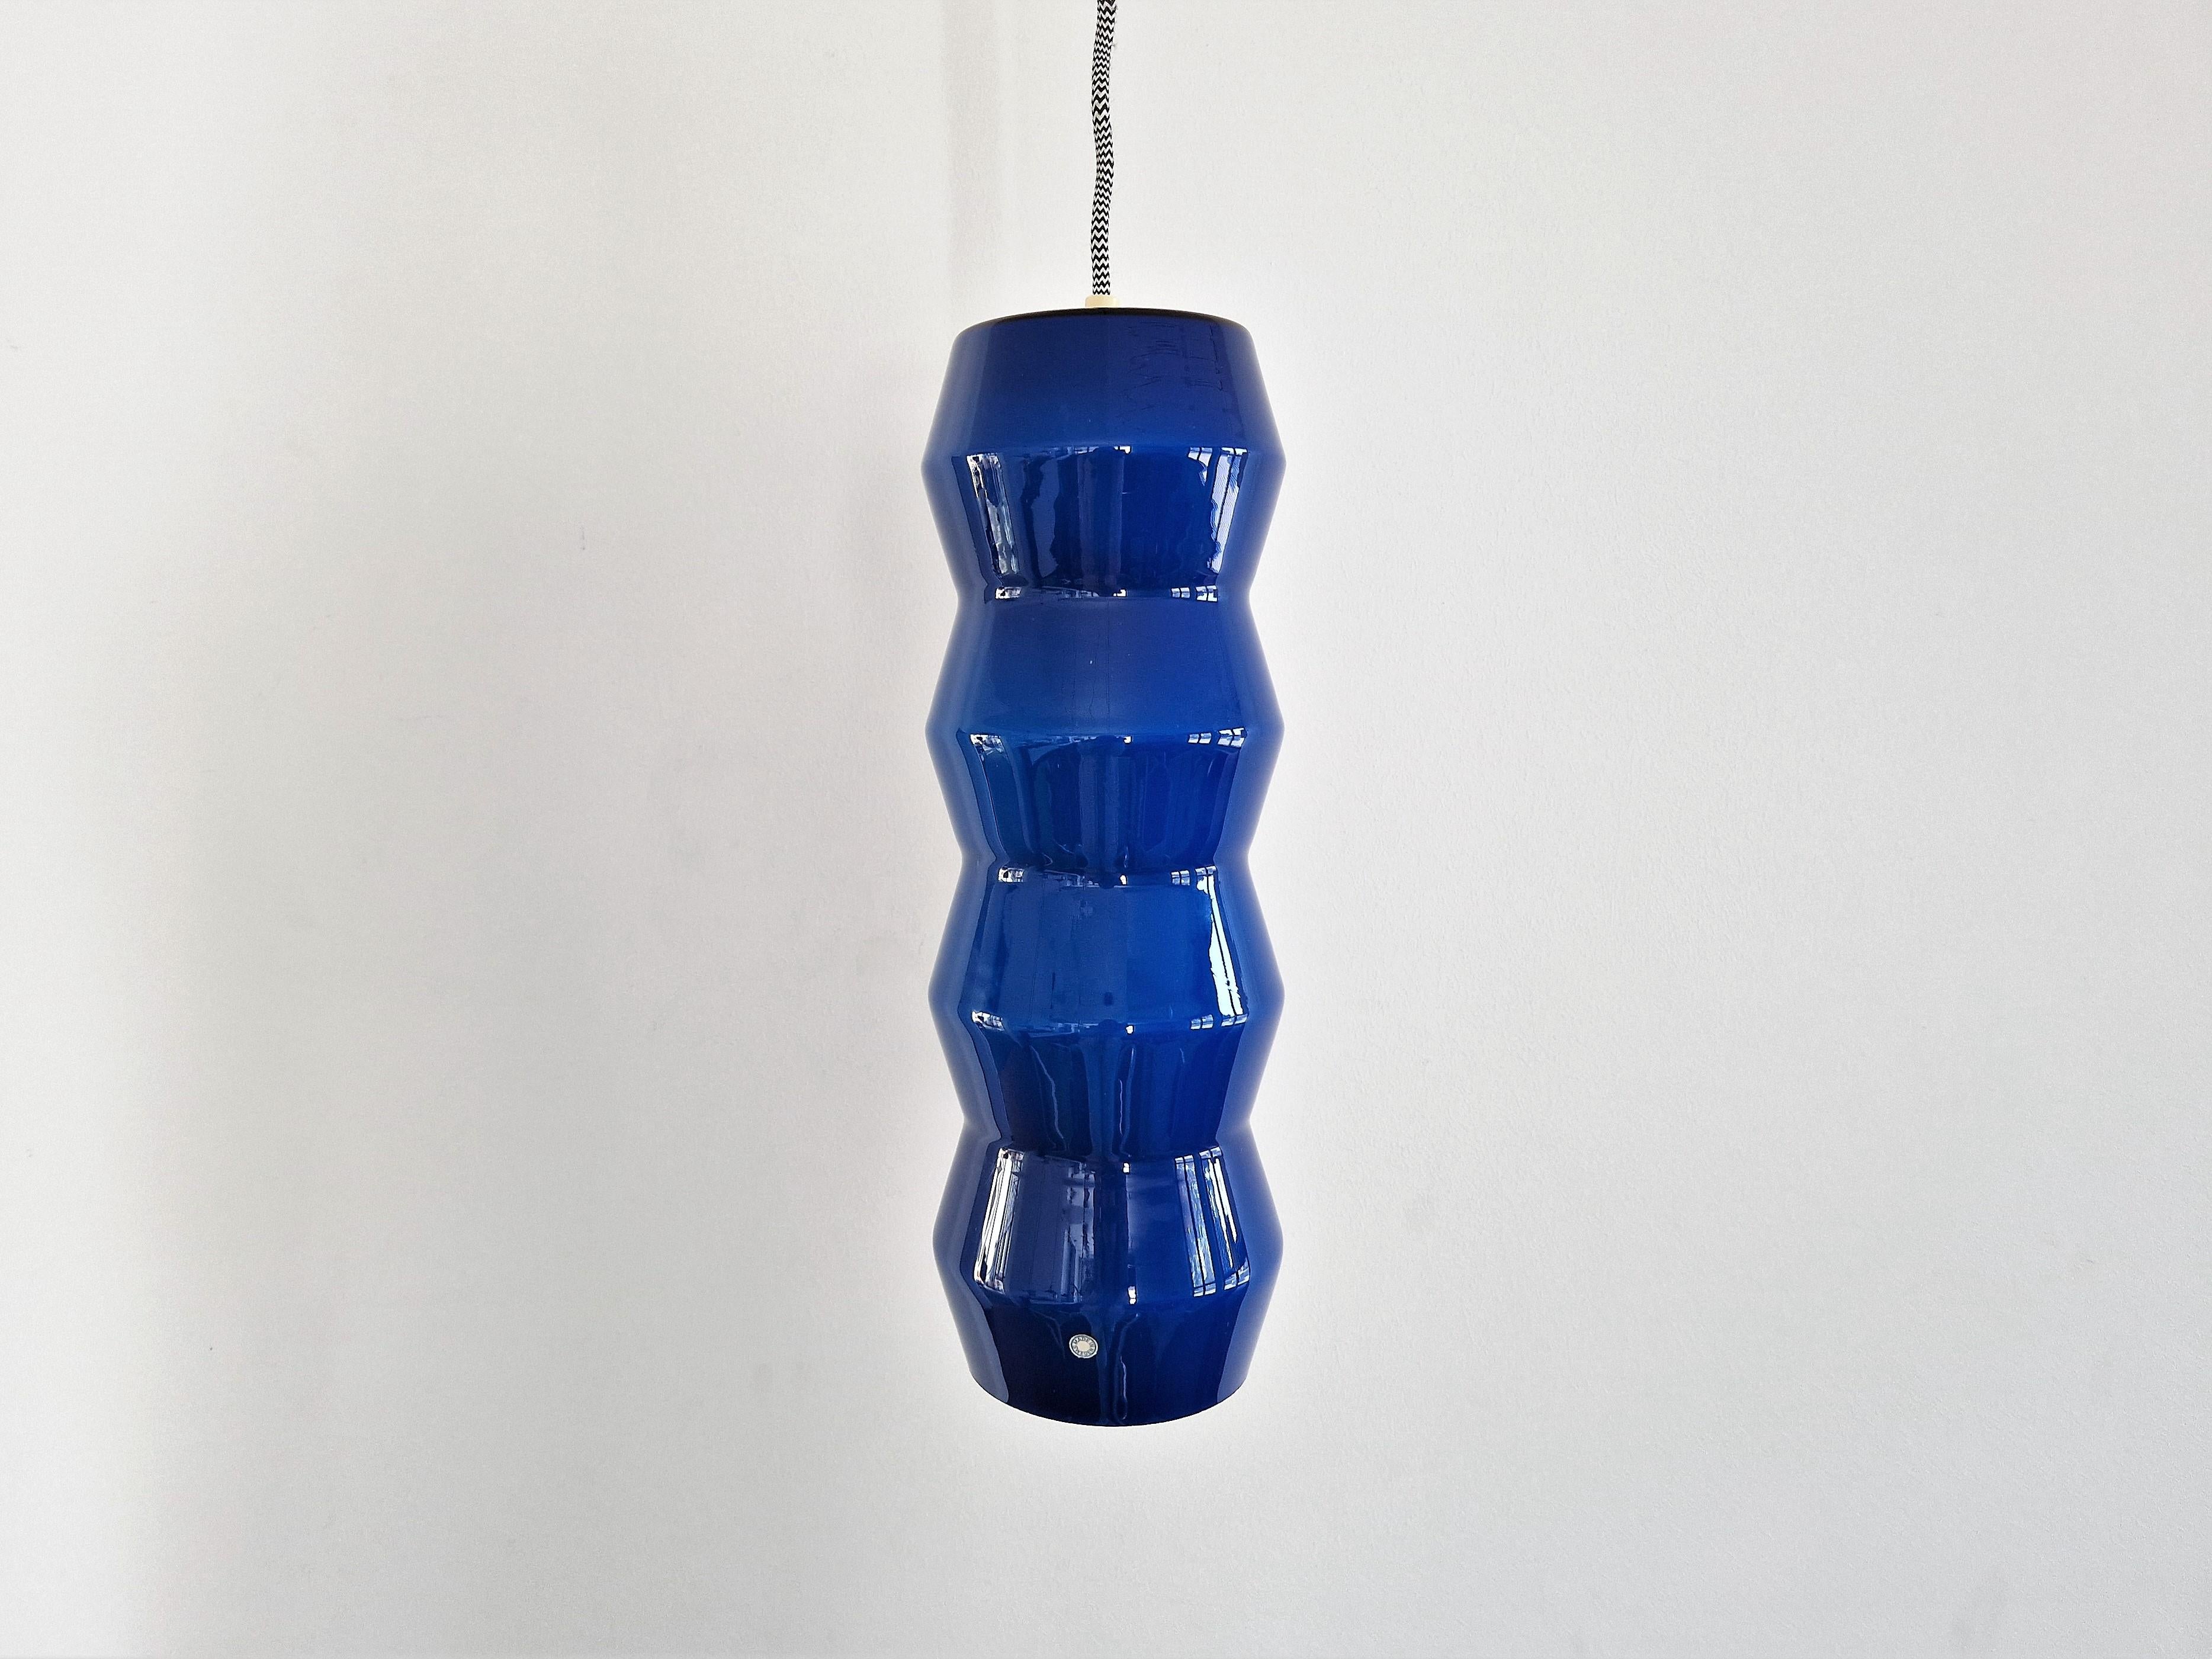 This stunning shaped glass pendant lamp is documented in a catalogue by the company of 'Indoor'. This was the importer and dealer of light brands as Vistosi, Venini and Arteluce in The Netherlands. They do not connect this light to a designer or